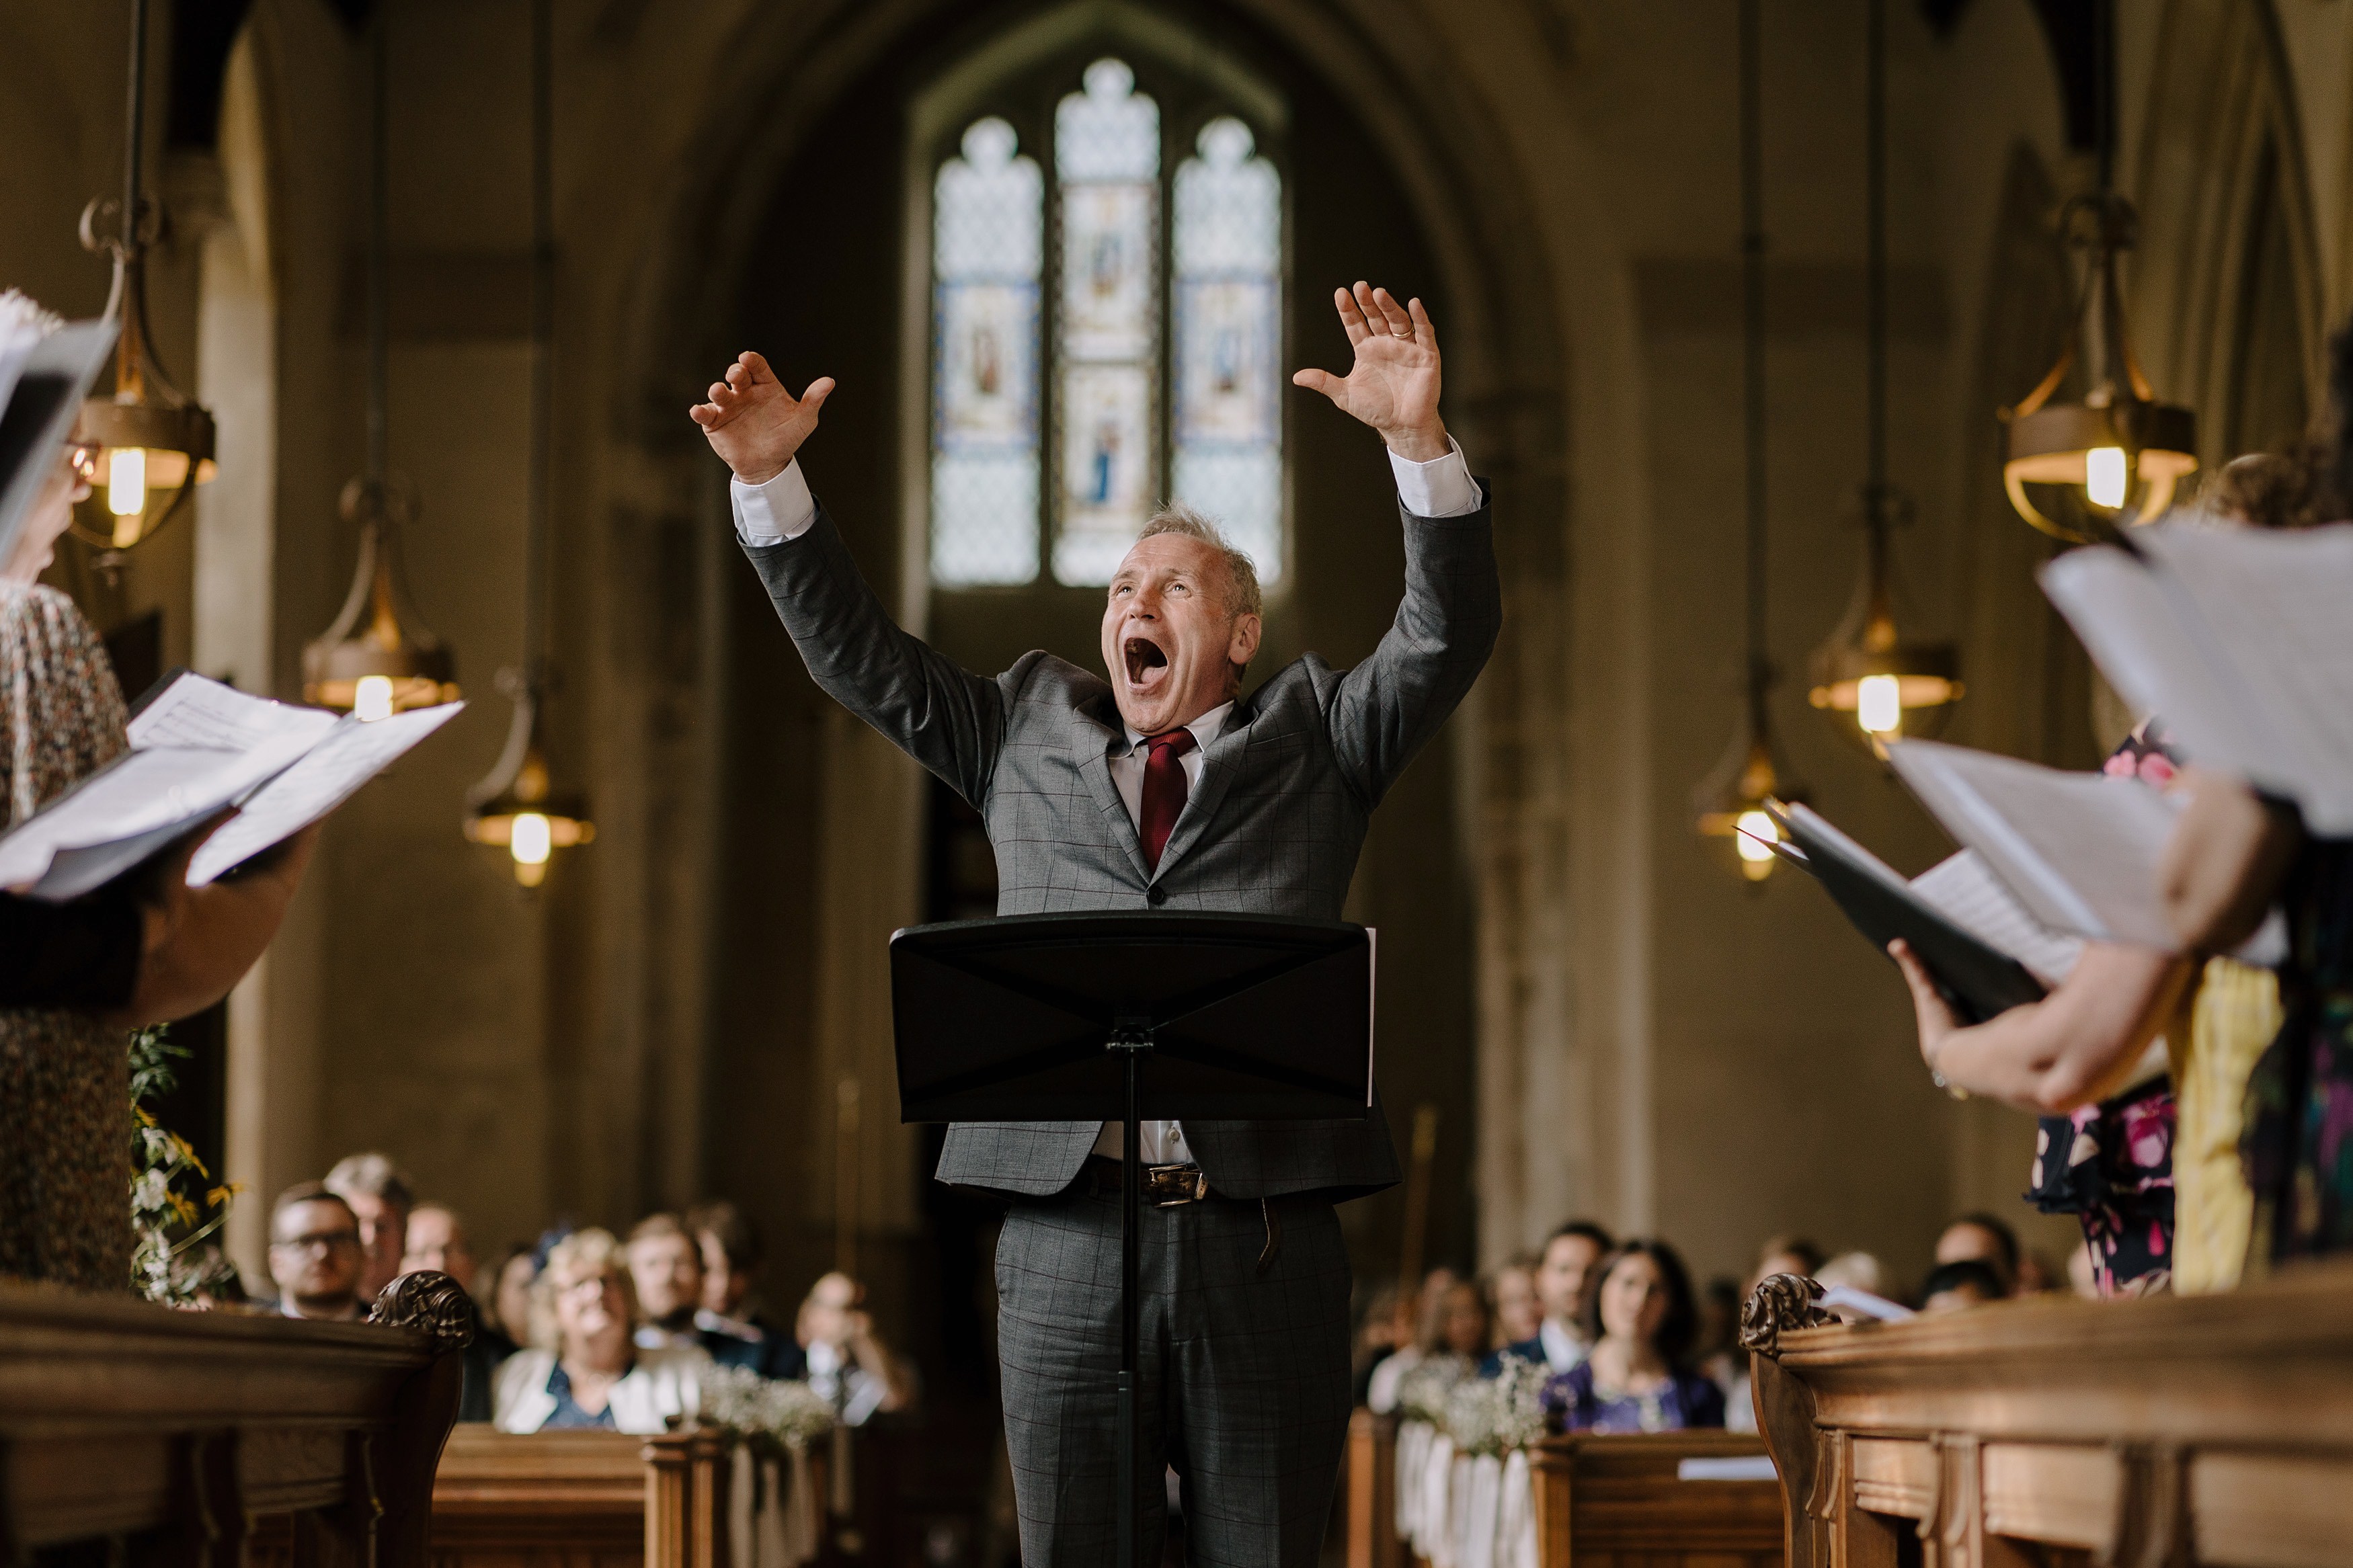 Conductor leading the choir in a hymn during the wedding ceremony